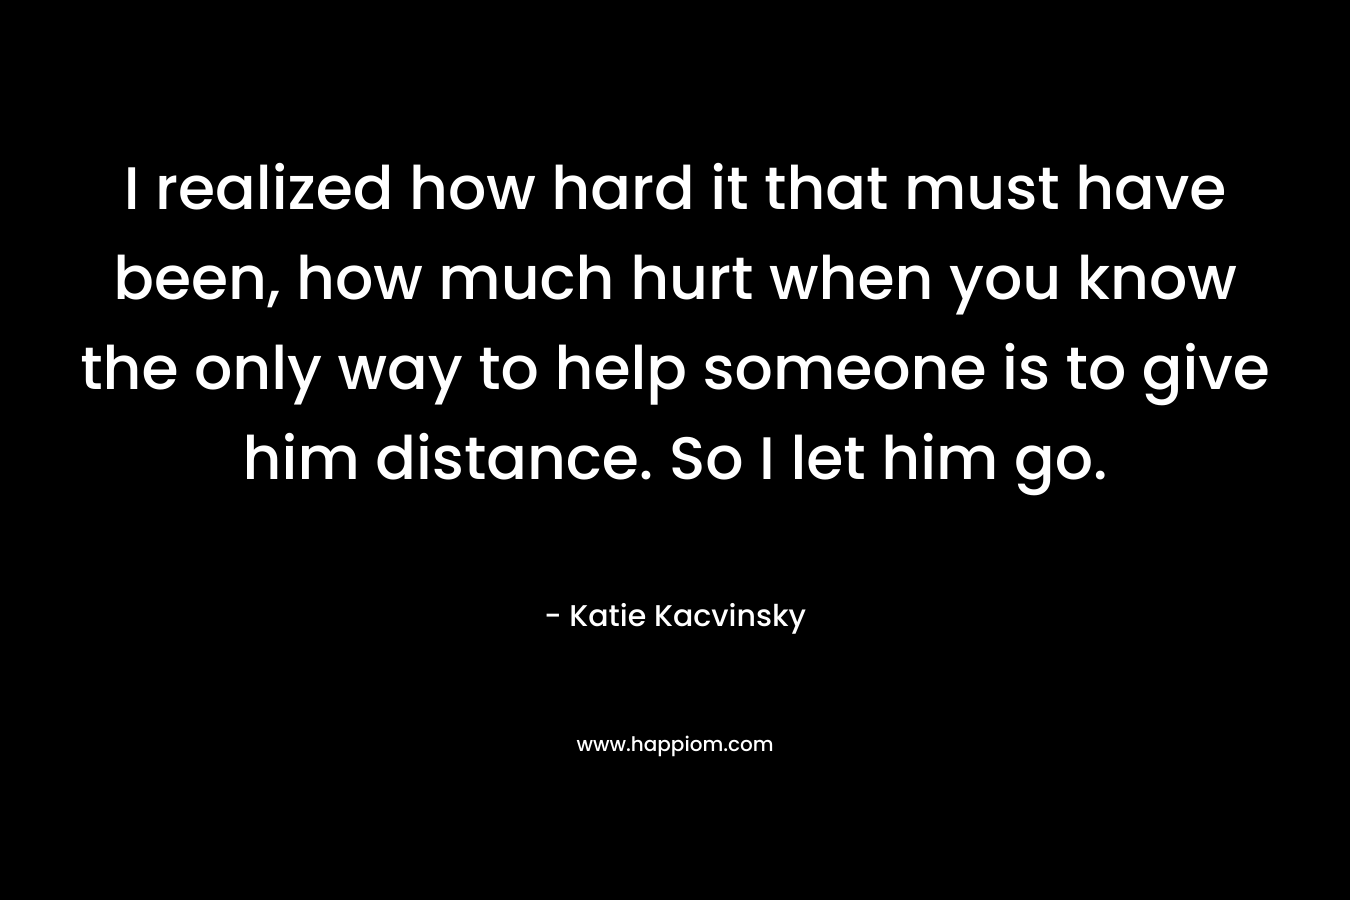 I realized how hard it that must have been, how much hurt when you know the only way to help someone is to give him distance. So I let him go. – Katie Kacvinsky